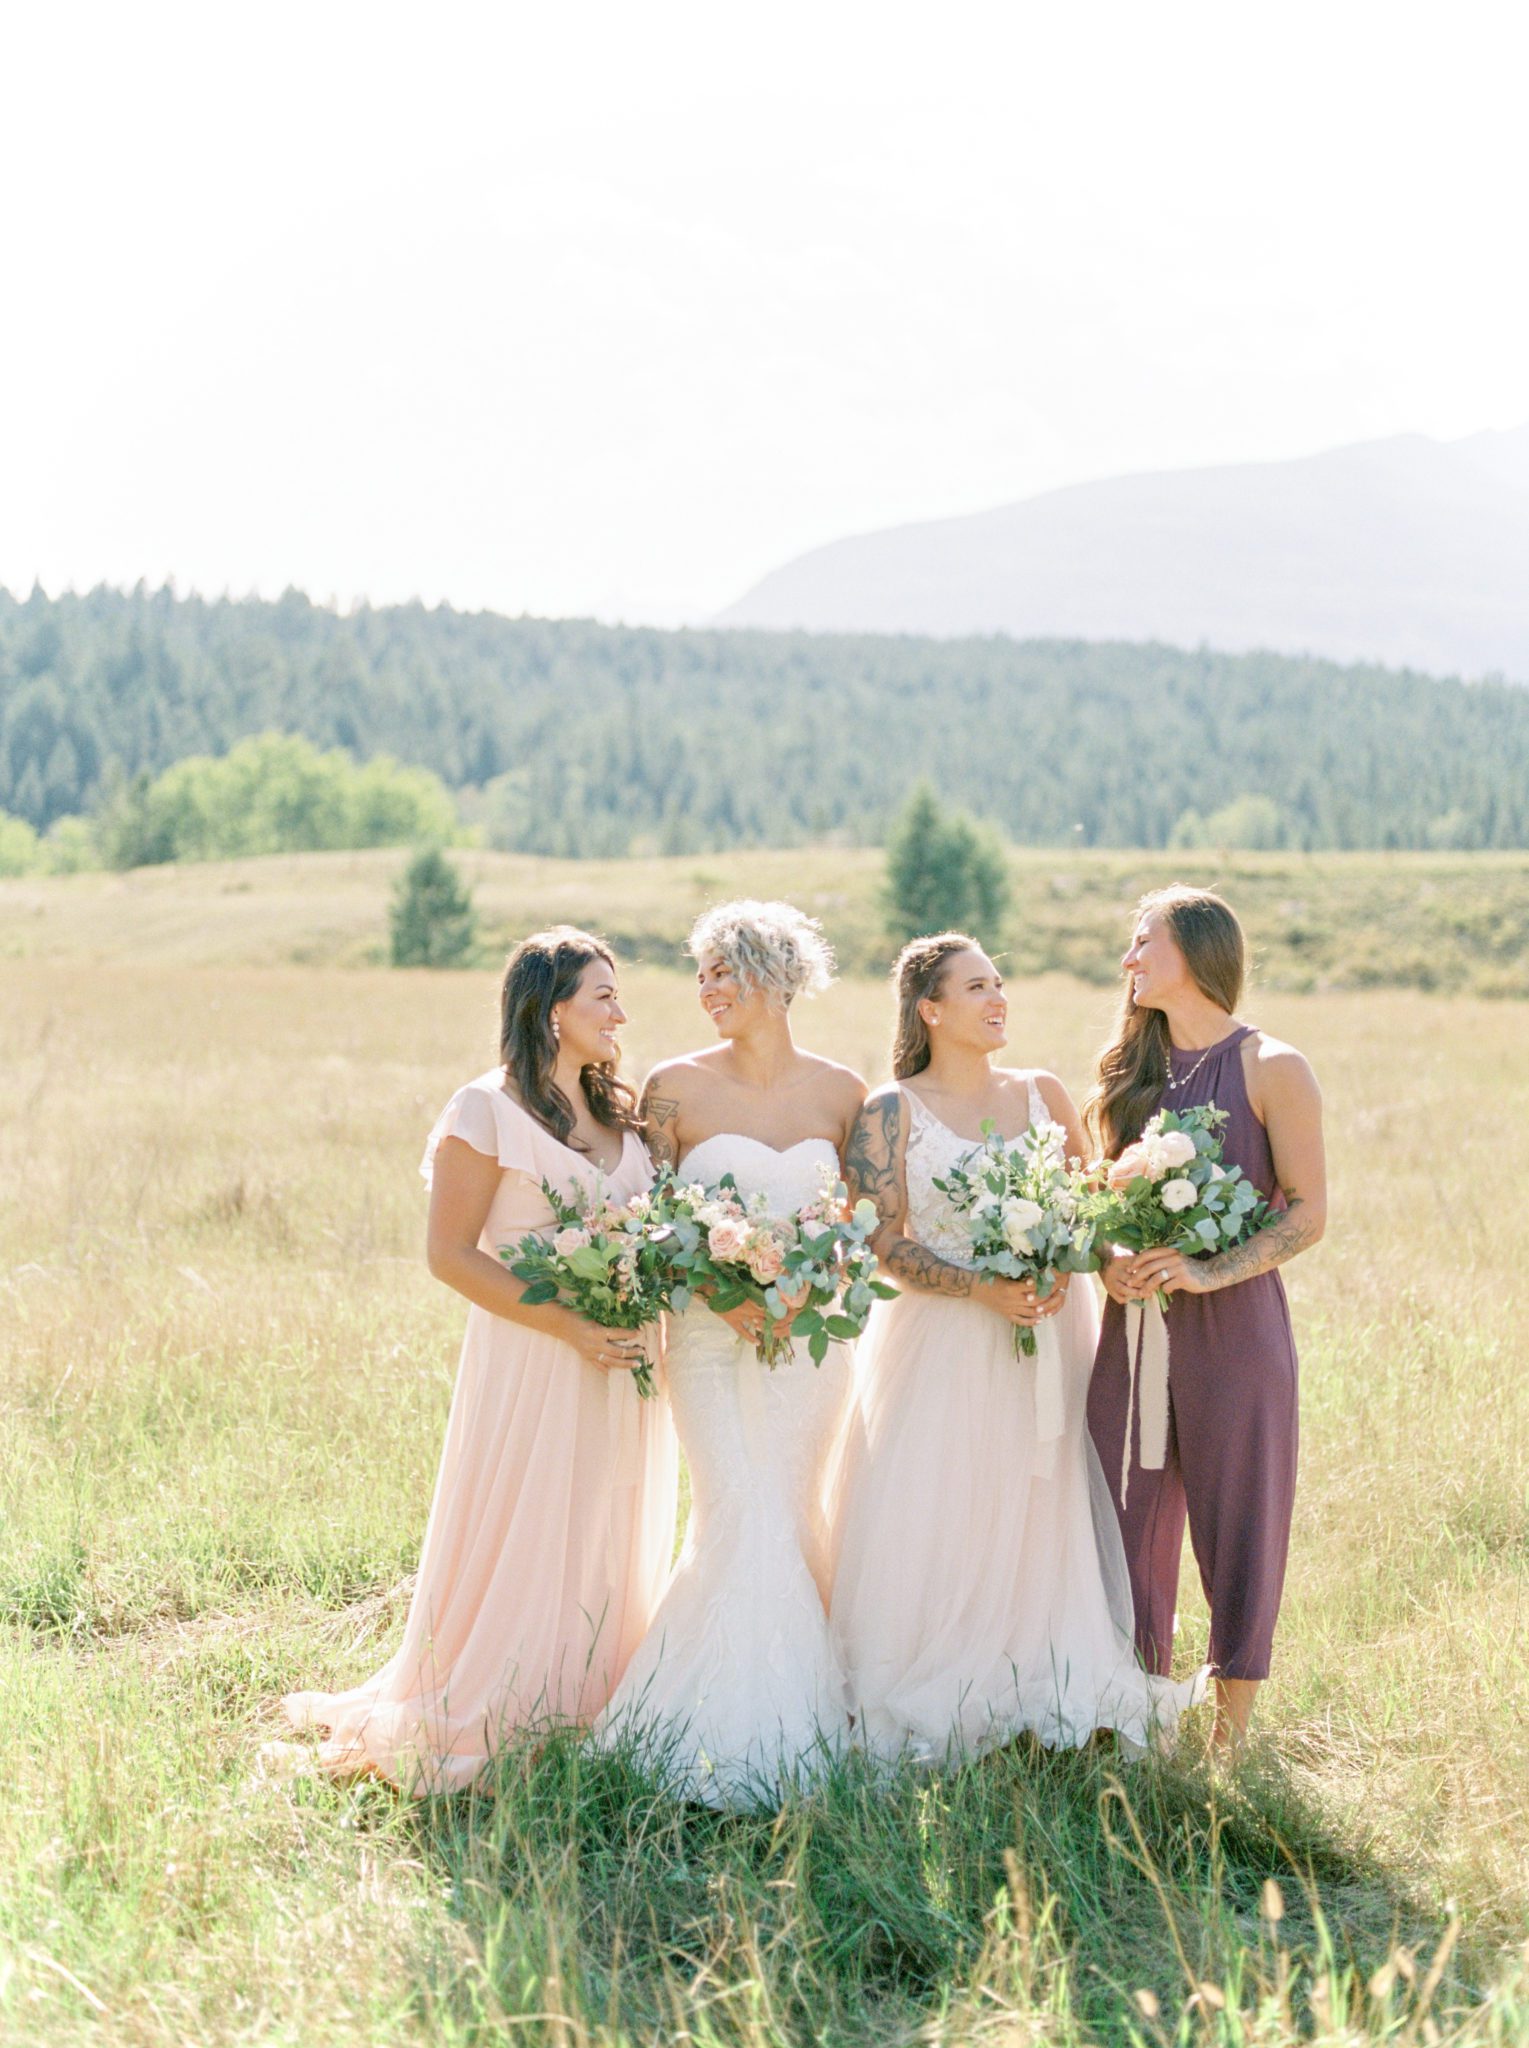 Bridal inspiration for a summer wedding in the mountains of British Columbia